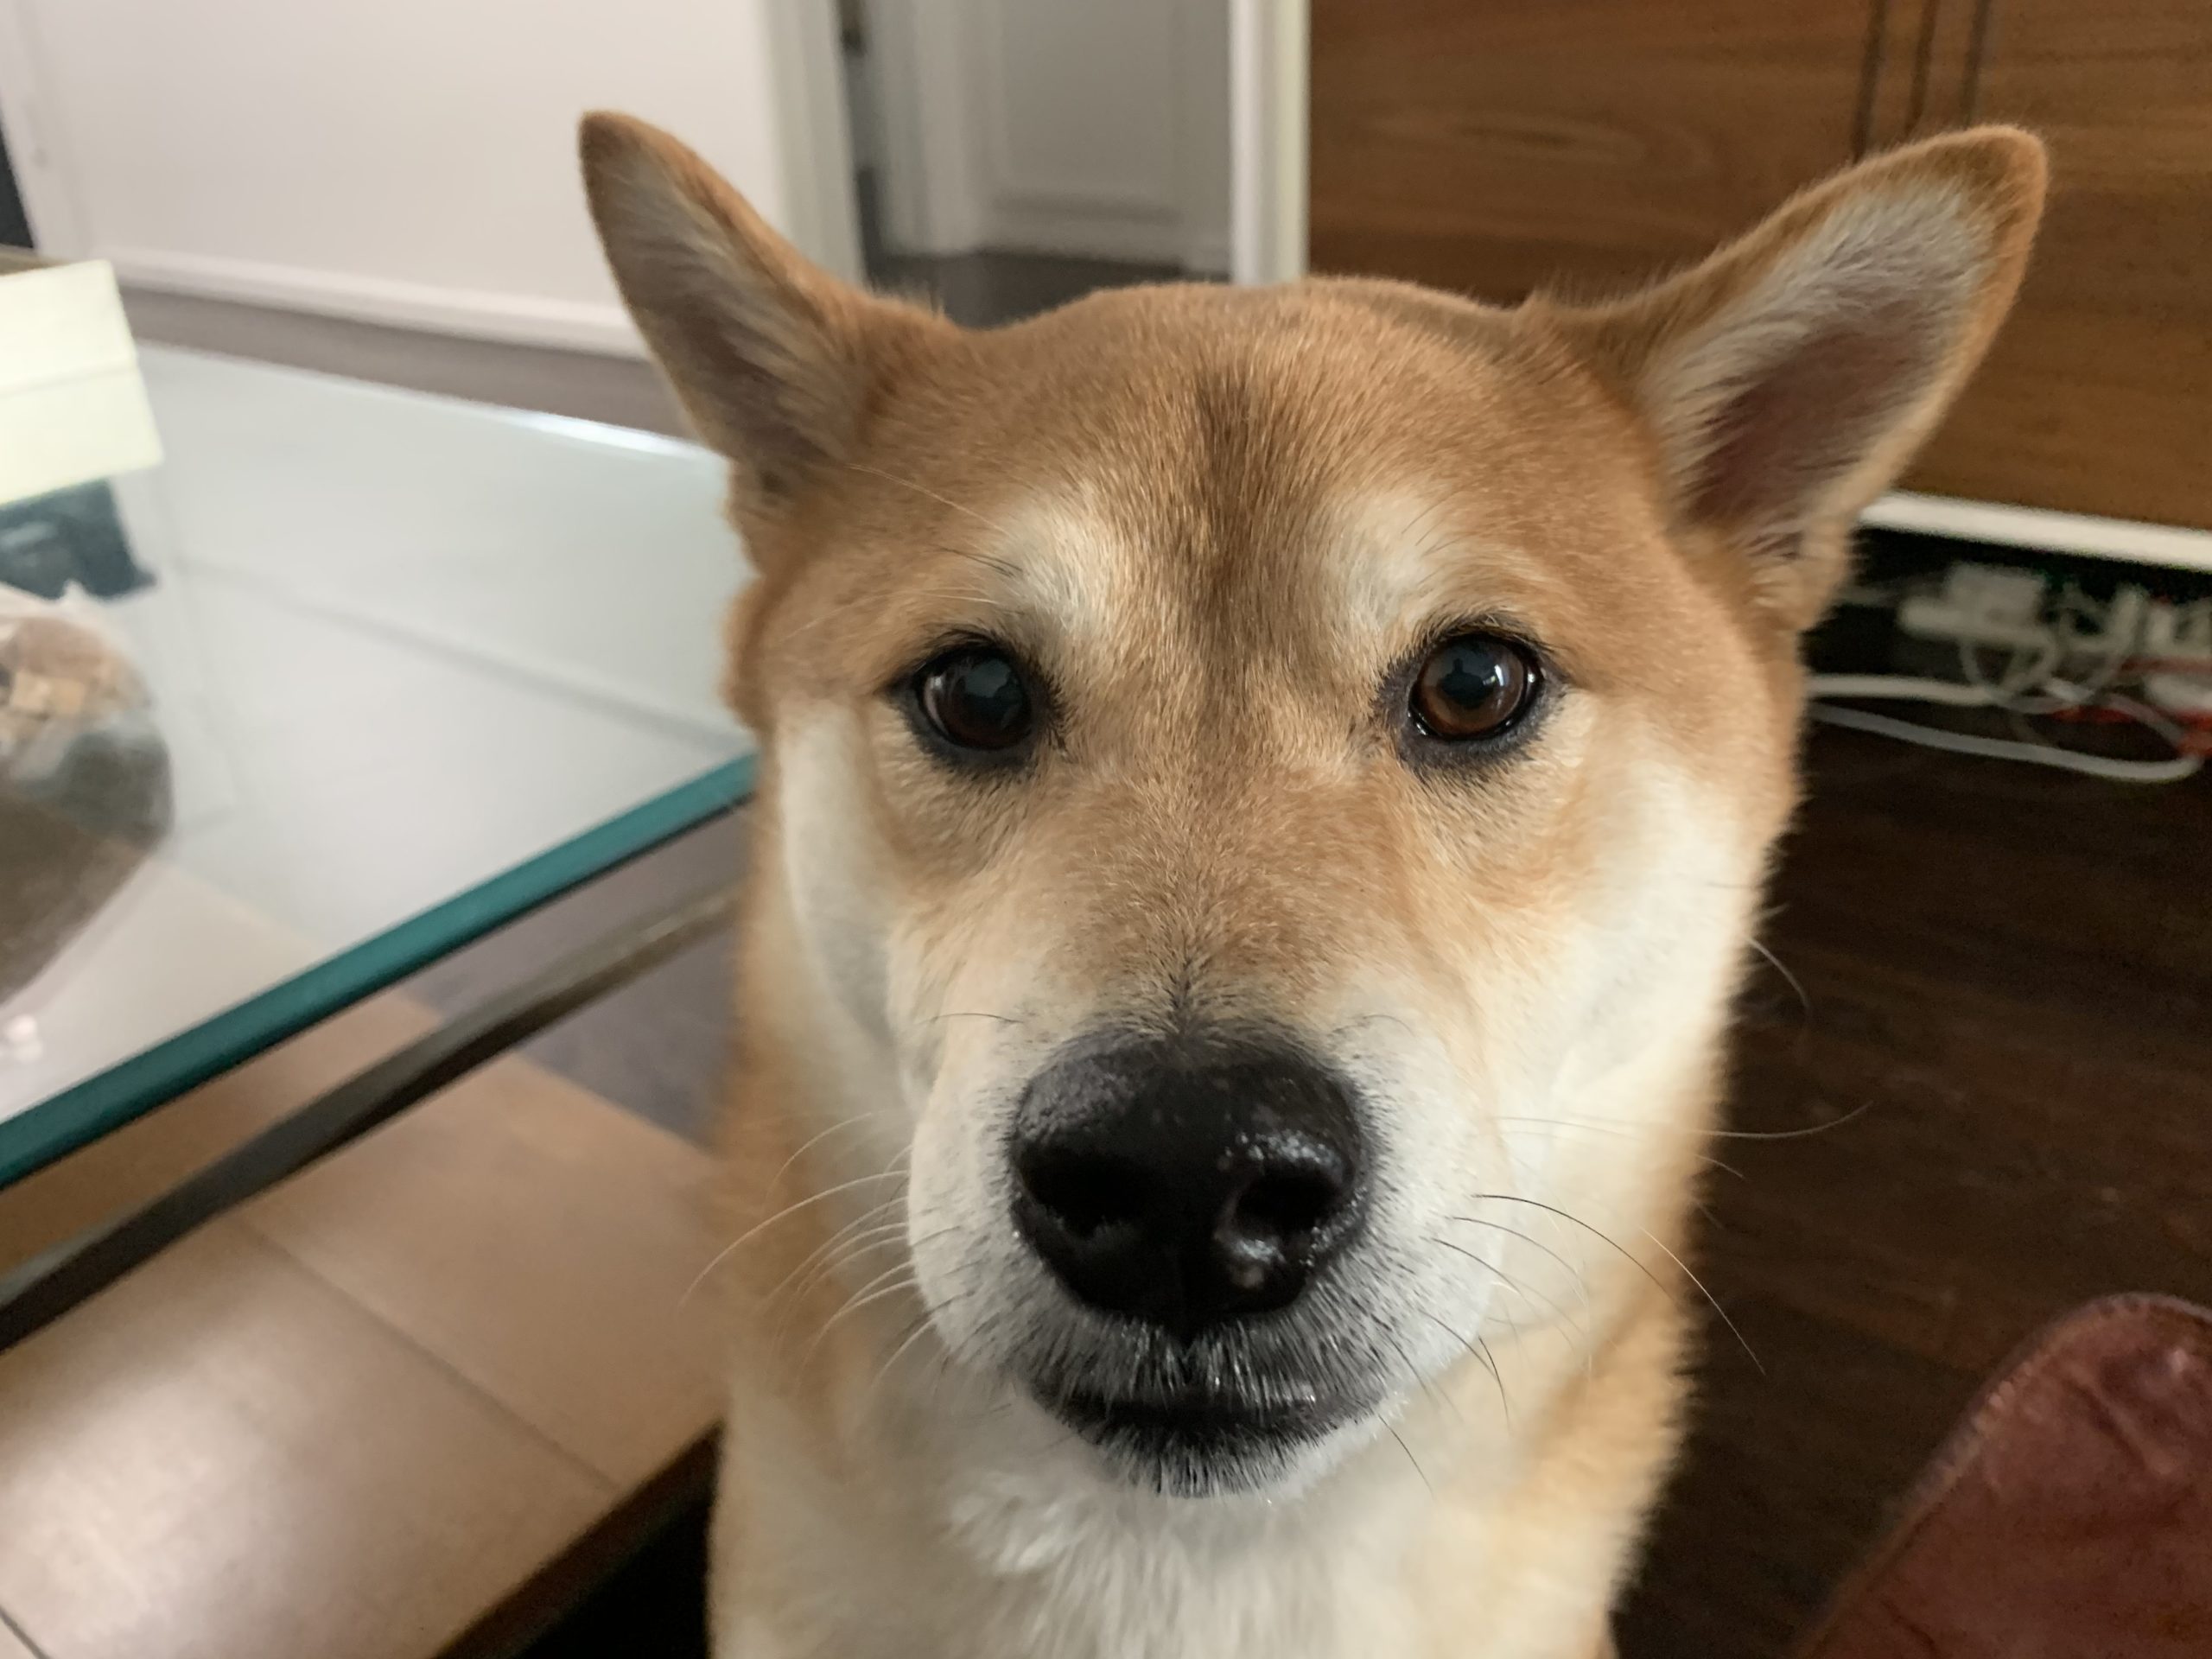 Is It Time to Sell Shiba Inu?